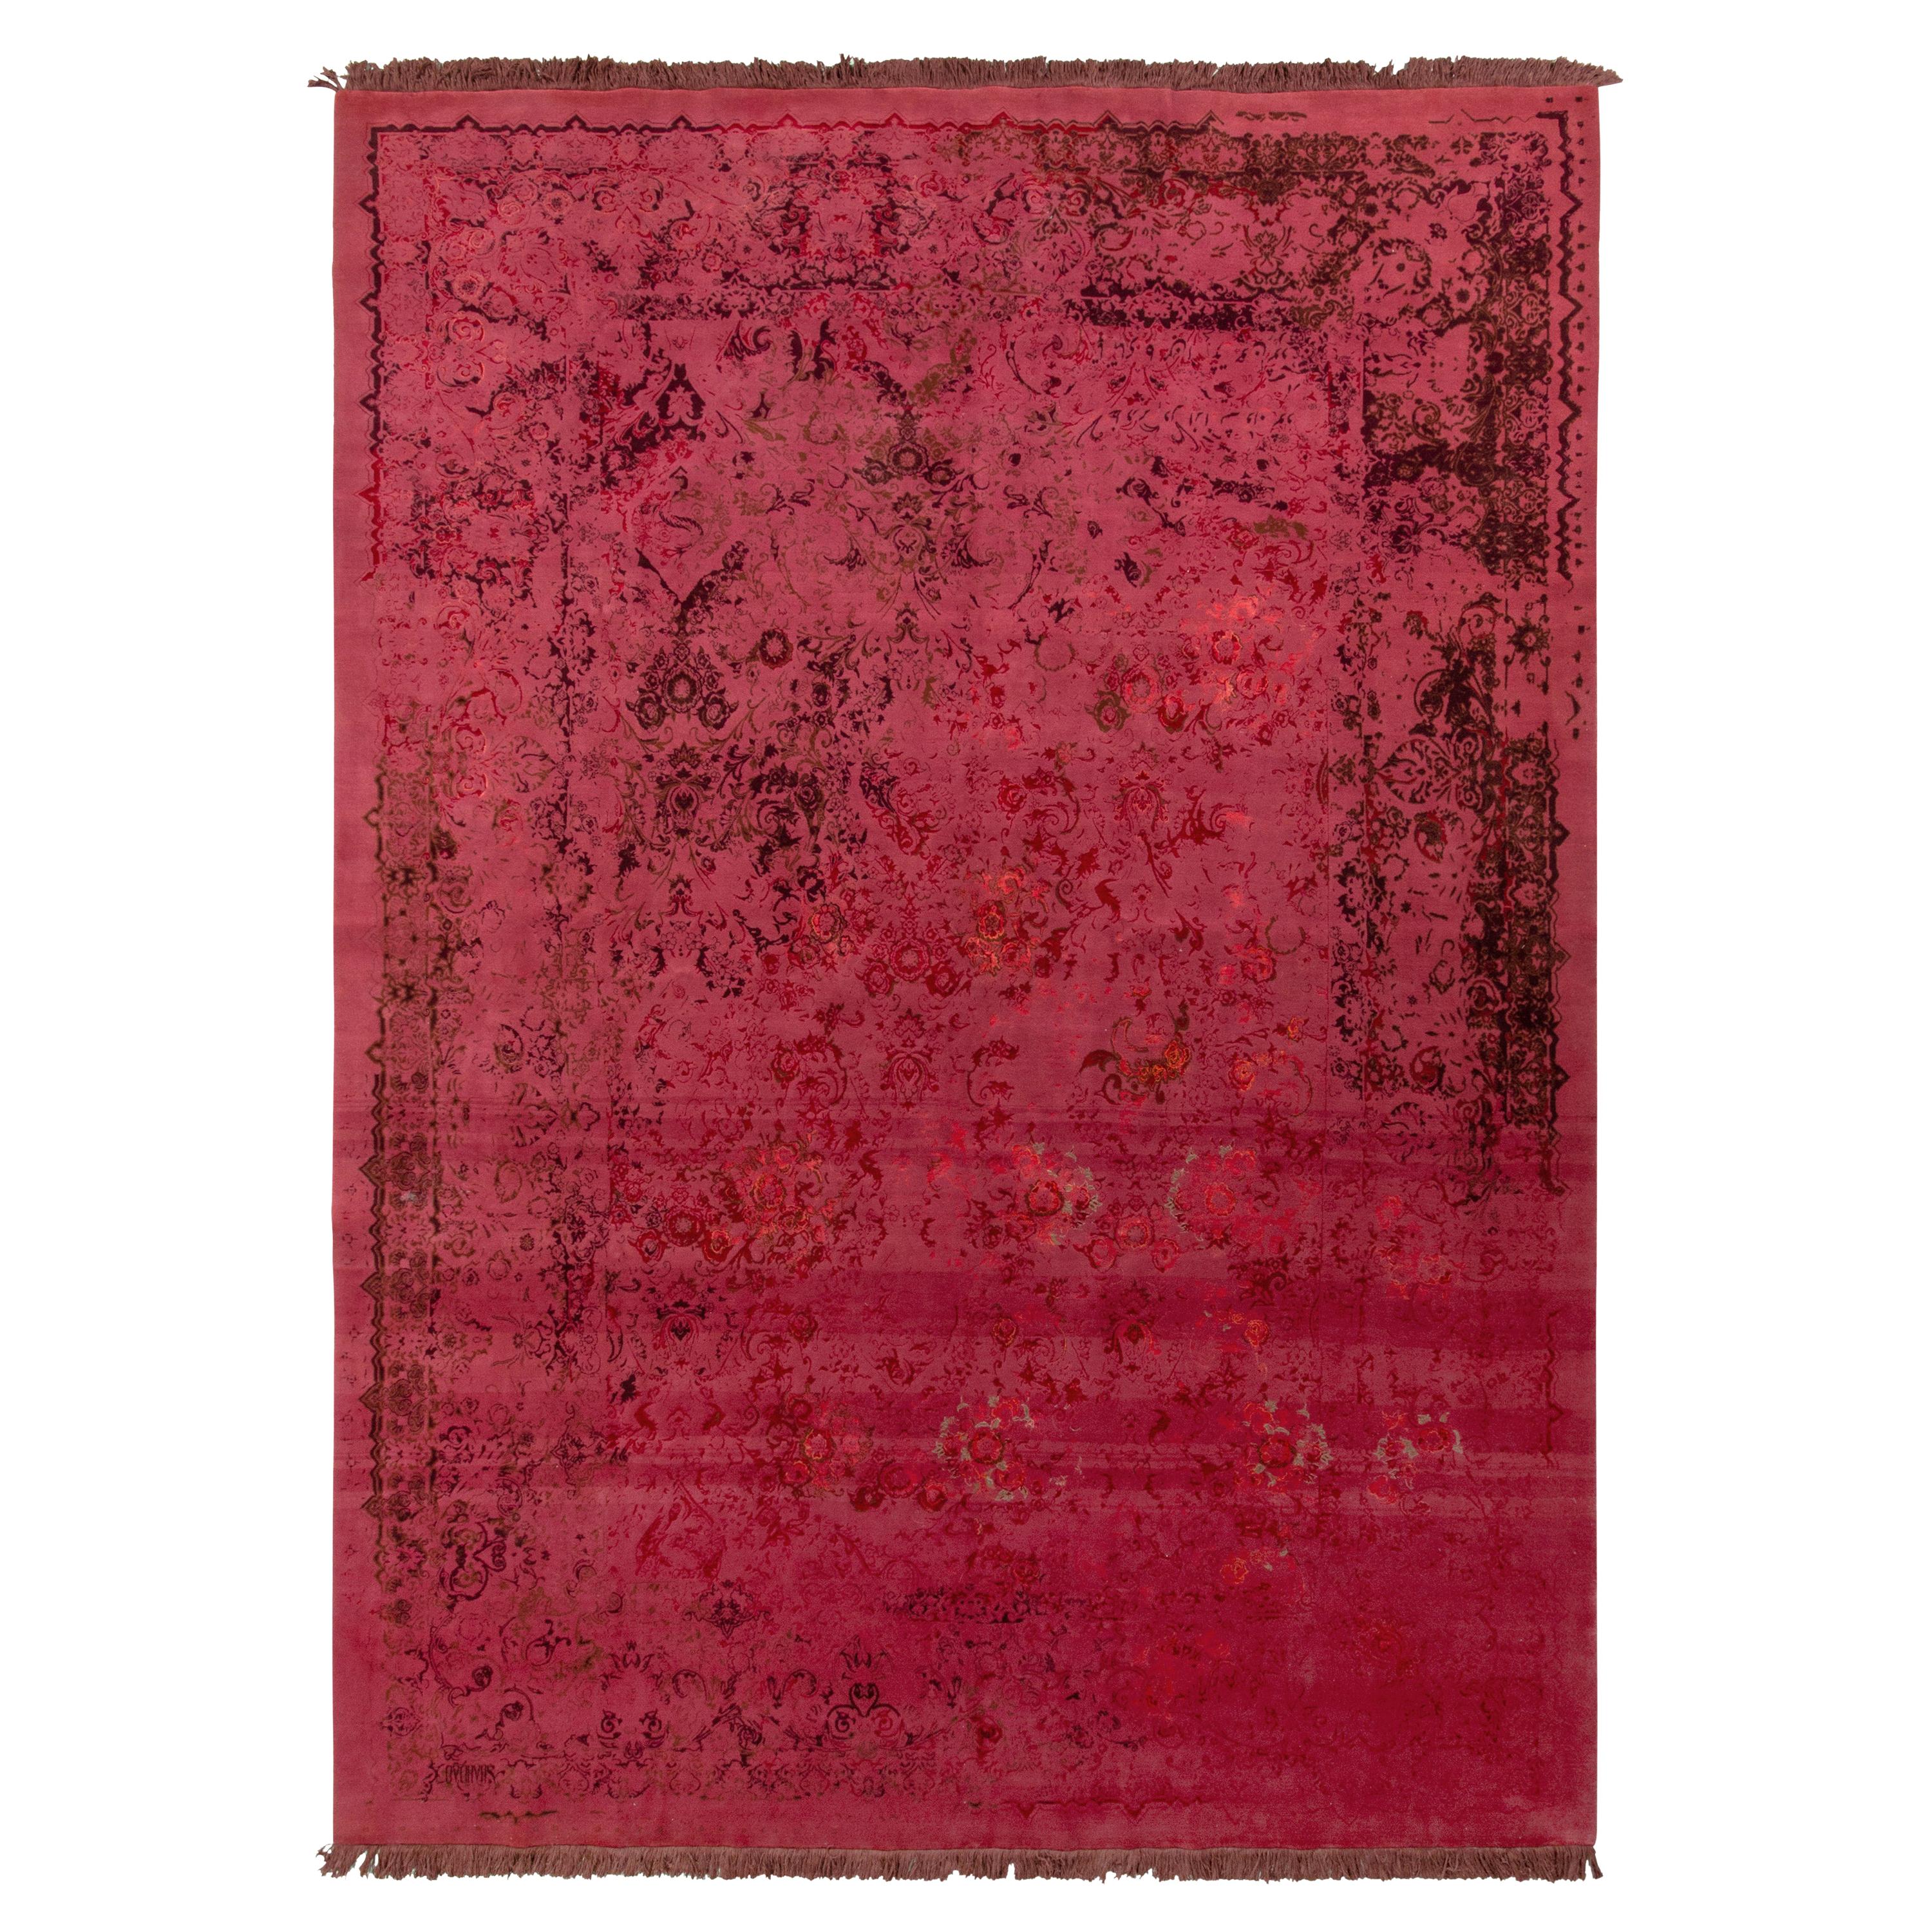 Rug & Kilim’s Persian Style Rug in Rose Red All Over Floral Pattern